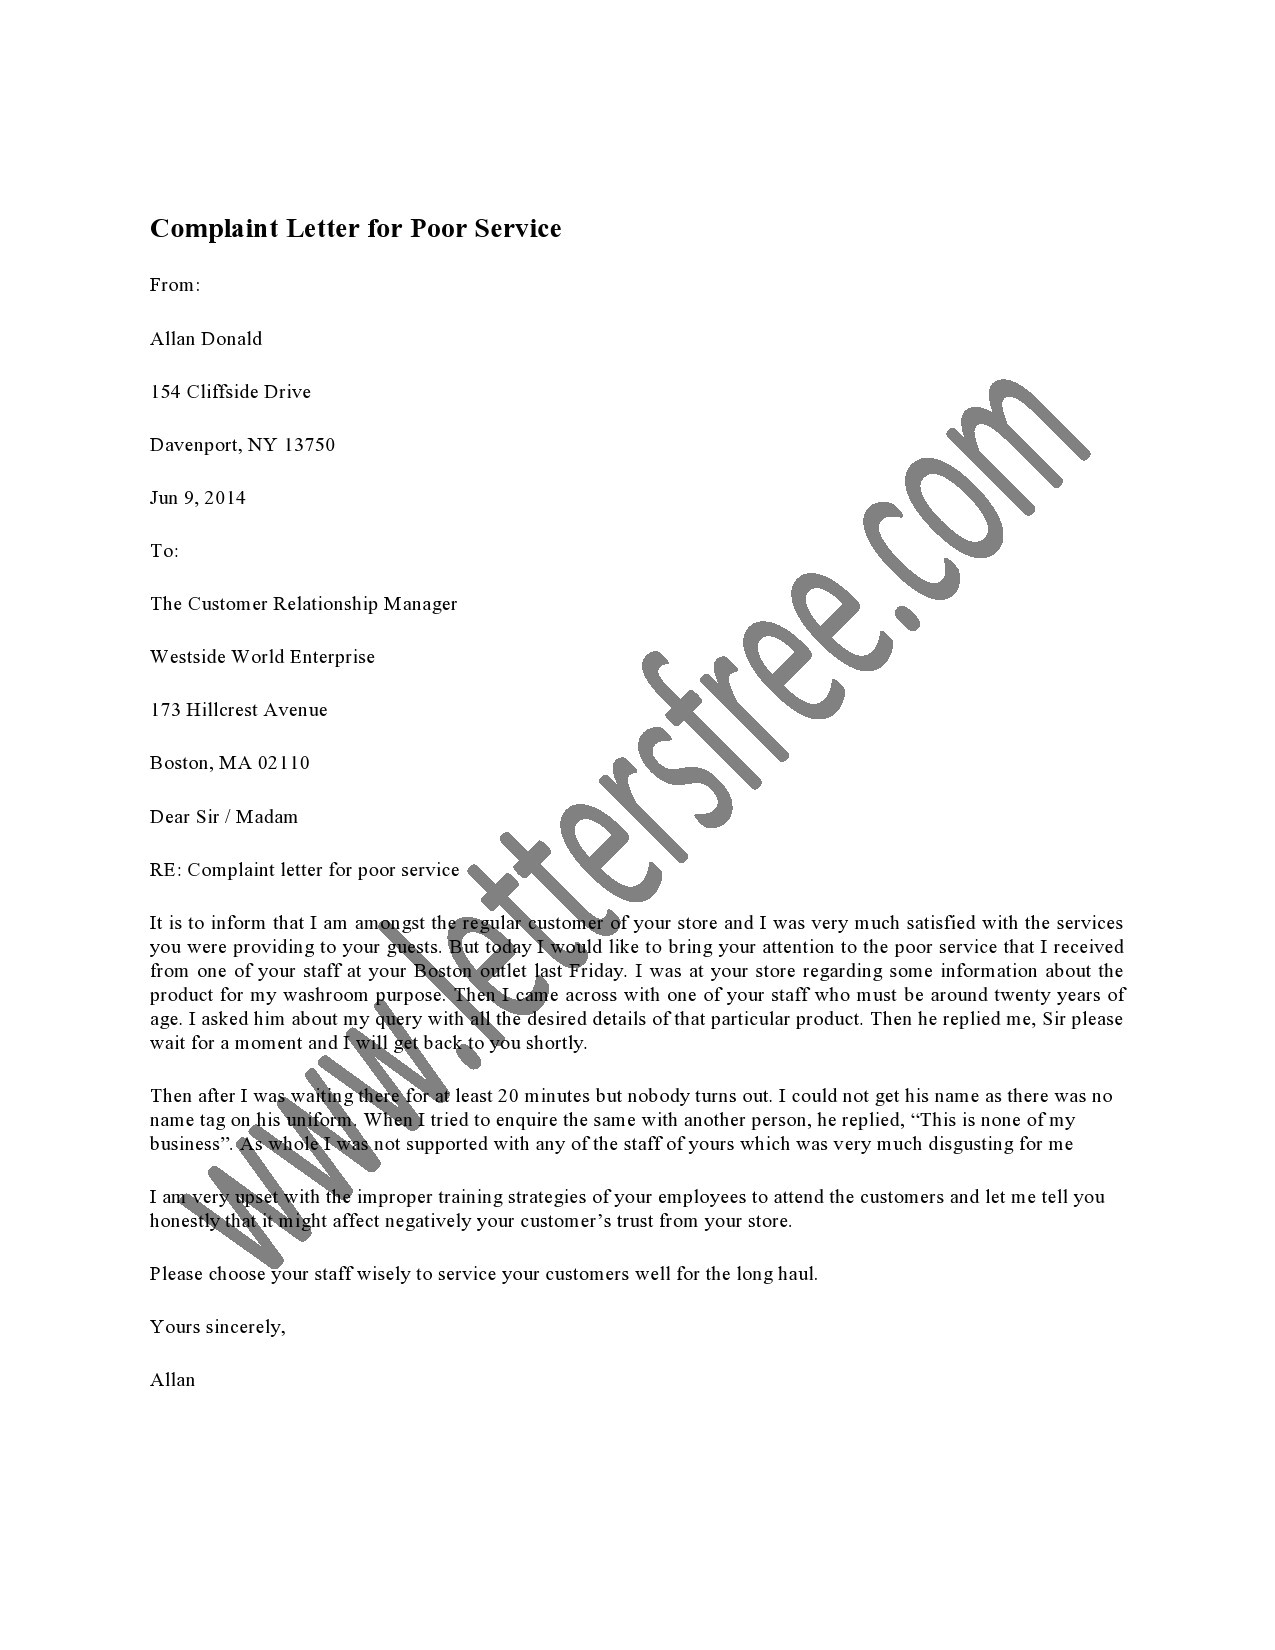 ppi claim letter template for credit card